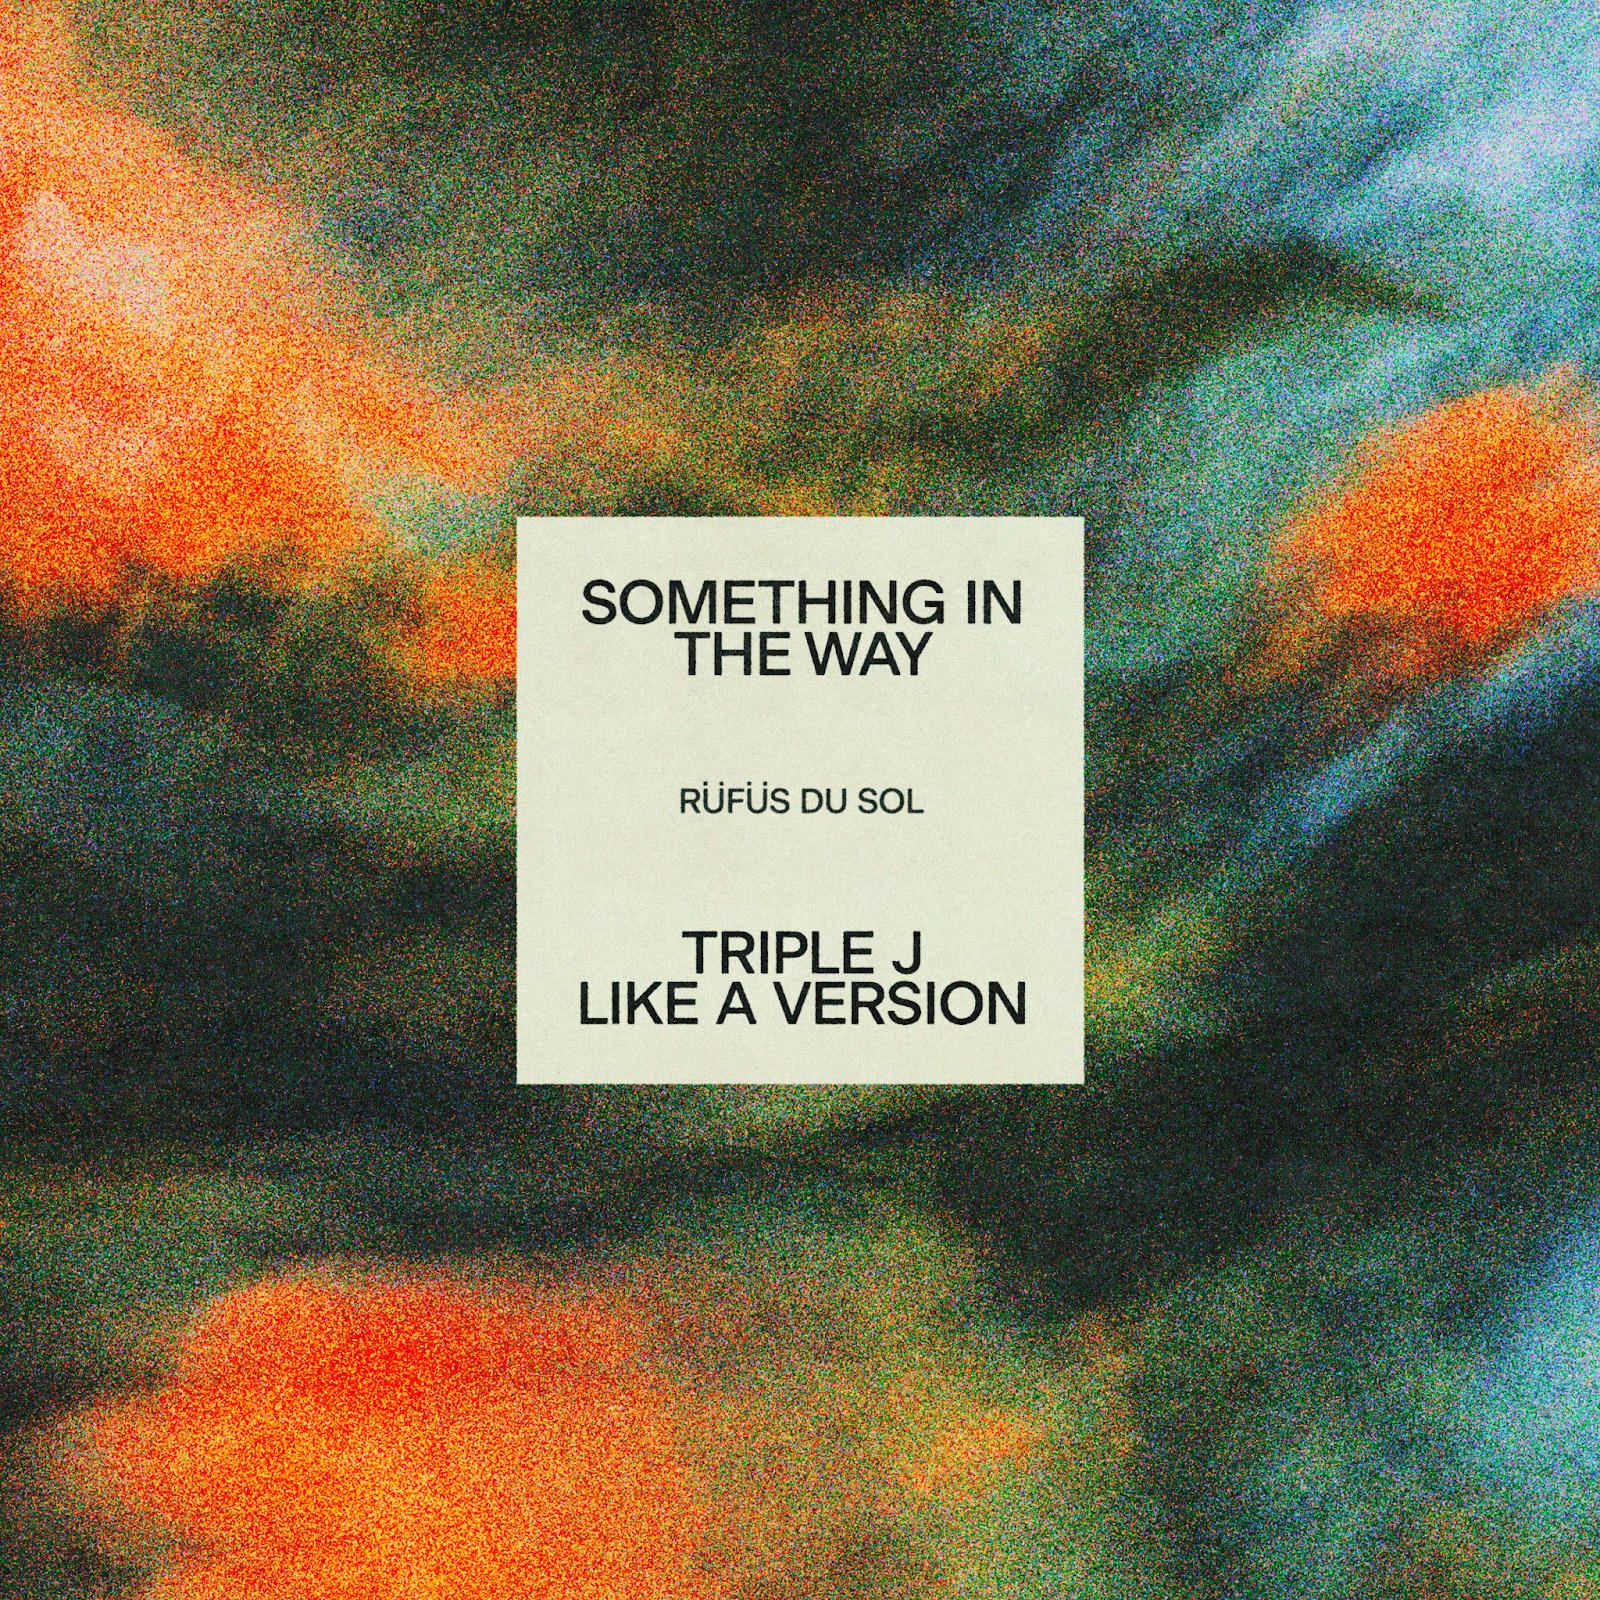 RÜFÜS DU SOL RELEASE COVER OF NIRVANA CLASSIC “SOMETHING IN THE WAY”